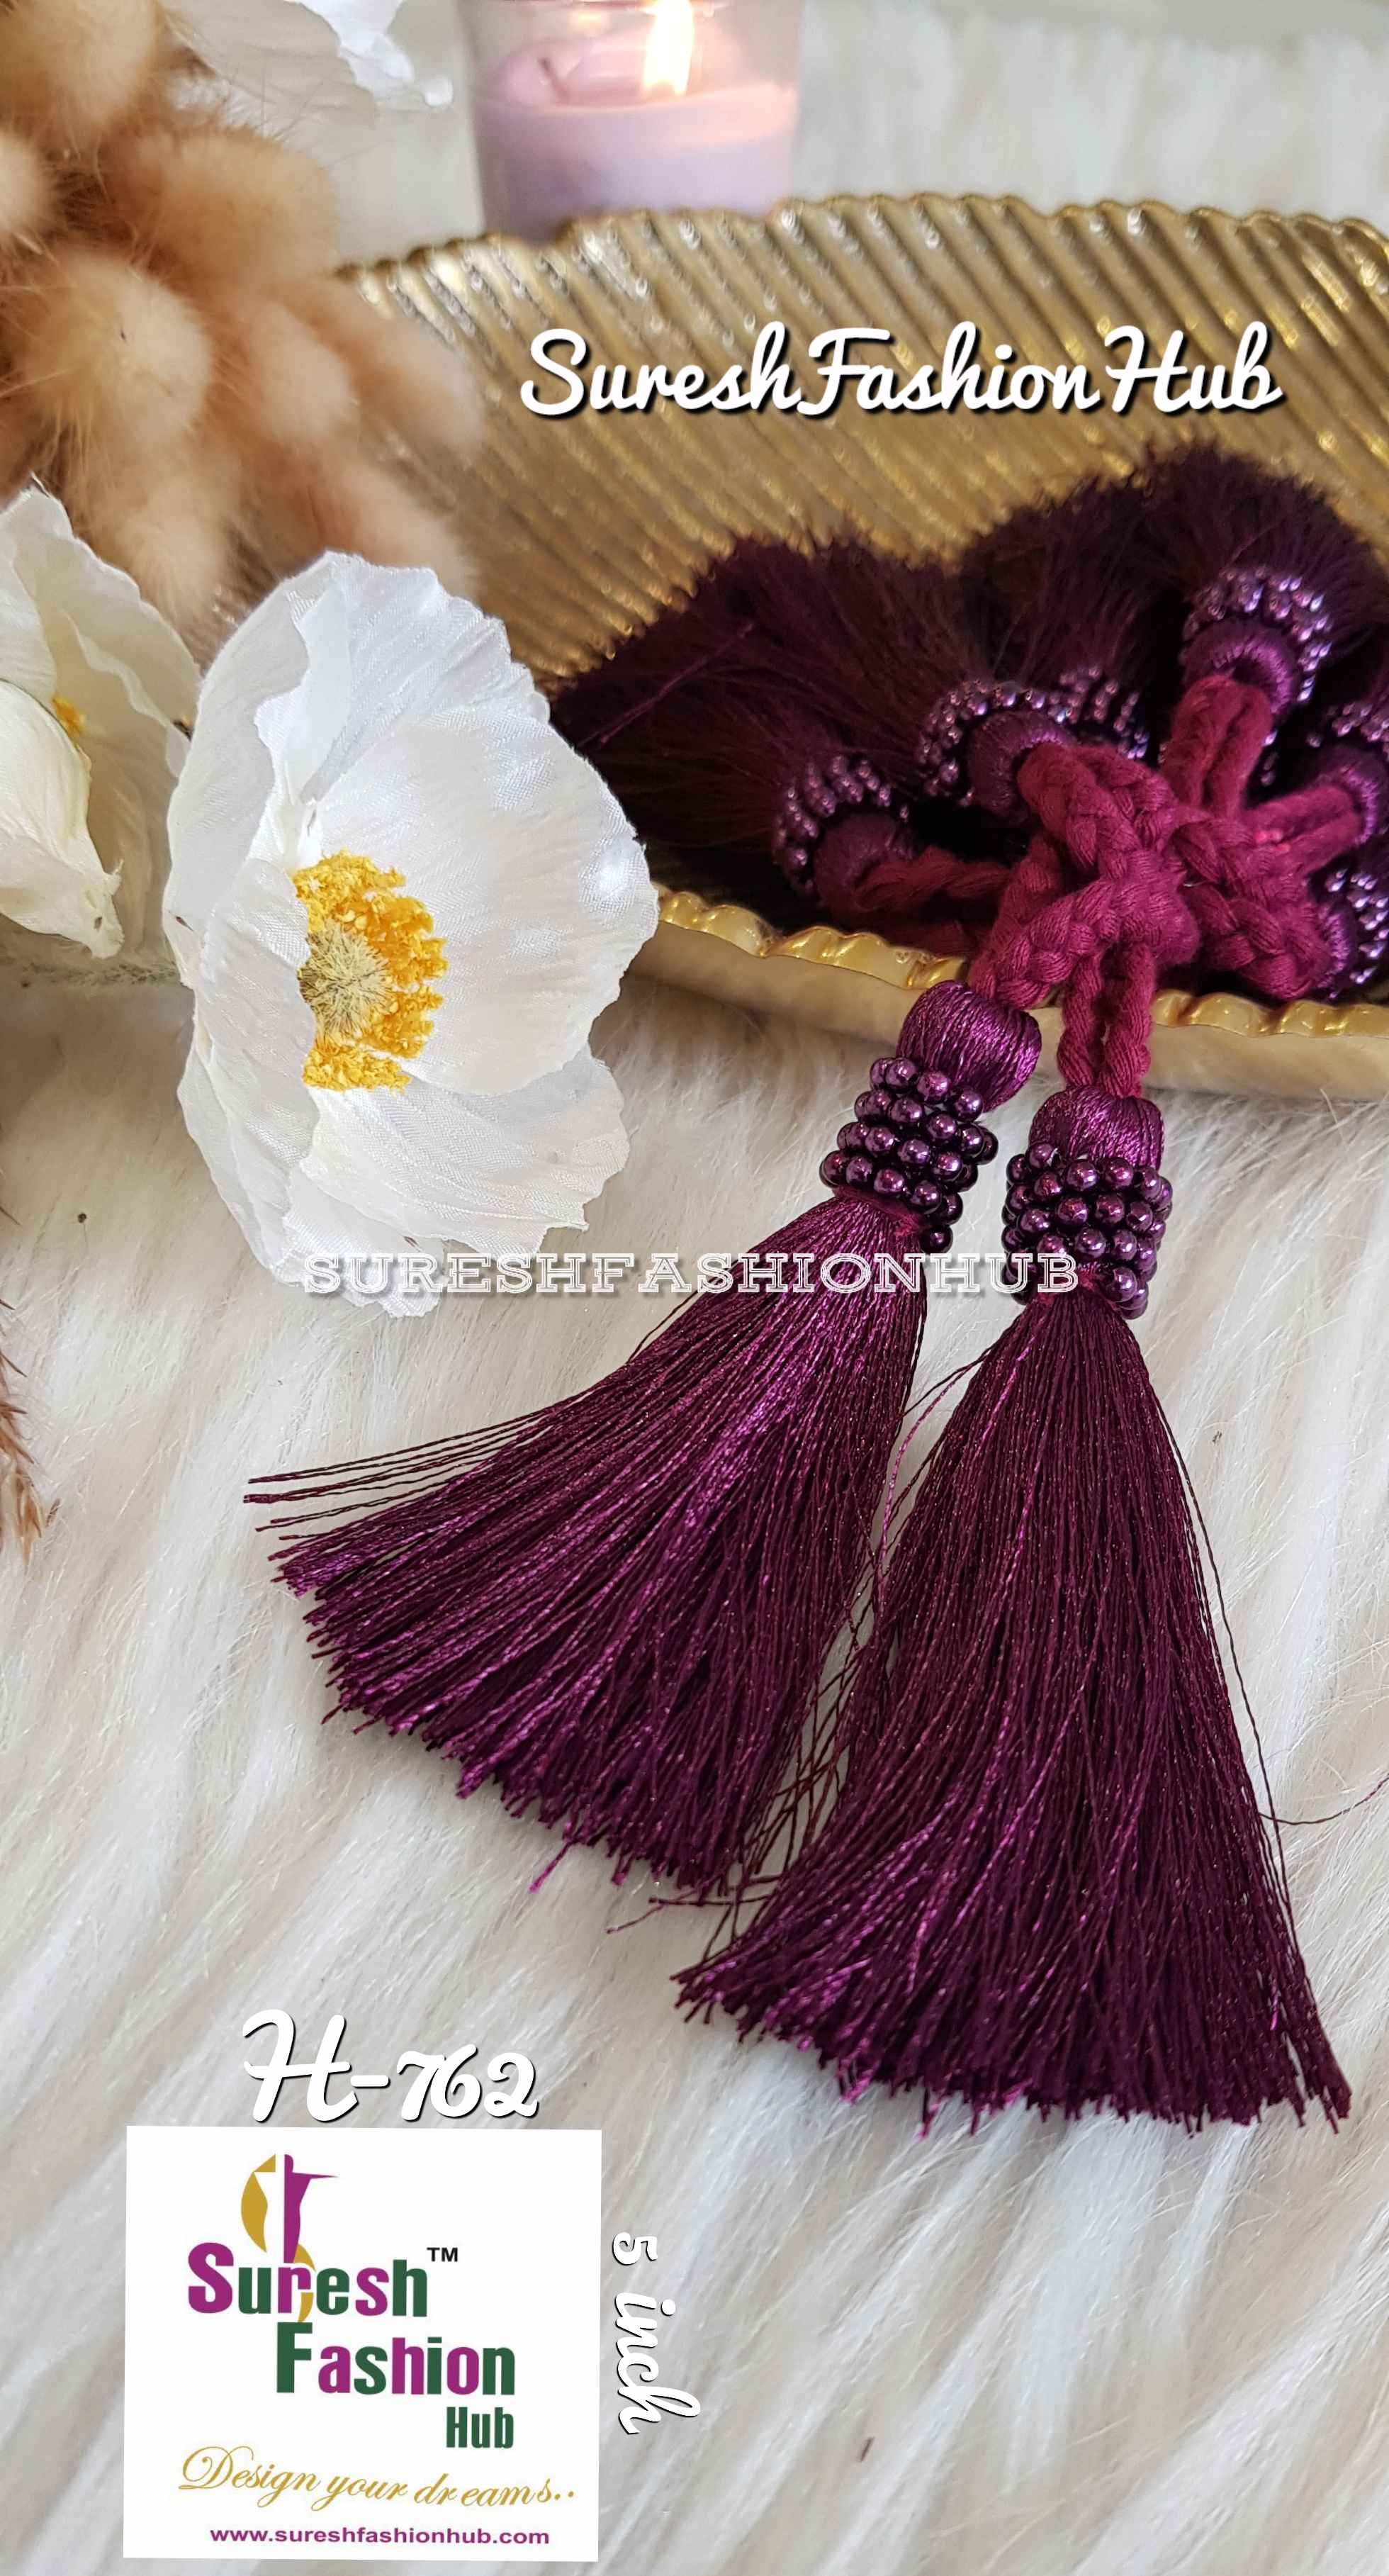 Tassel Bright Earrings Set Of Purple Color Summer Fashion Accessories Fringe  Earring Stock Illustration - Download Image Now - iStock